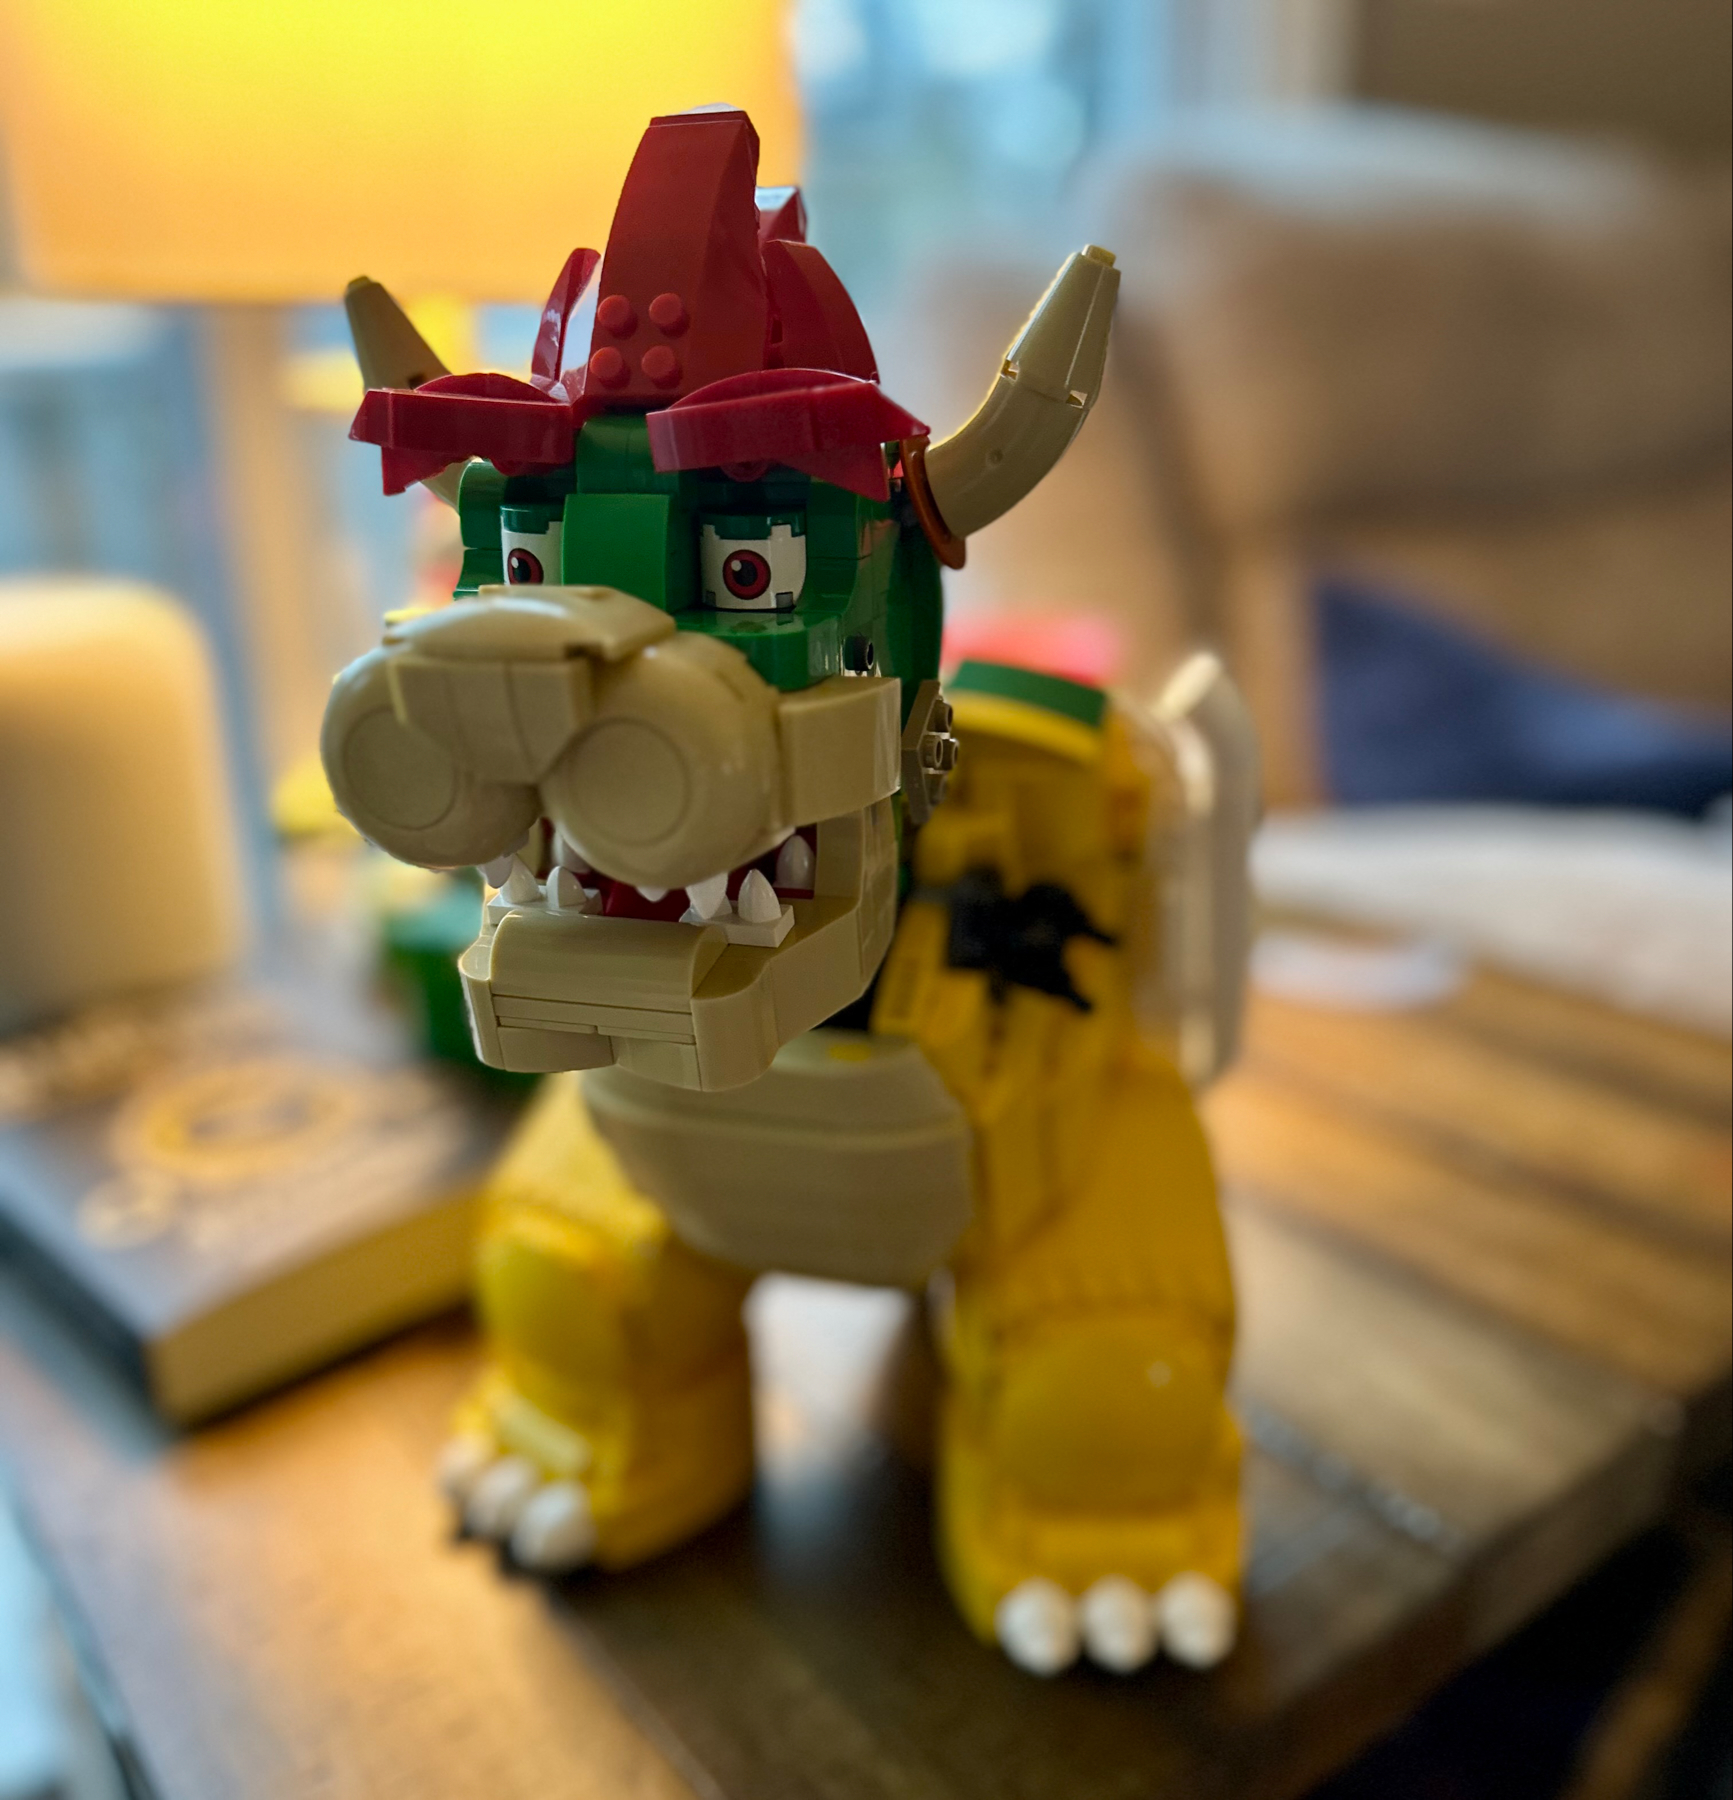 A LEGO Bowser model of a dinosaur with red spikes, green head, white teeth, and yellow body displayed on a wooden surface.